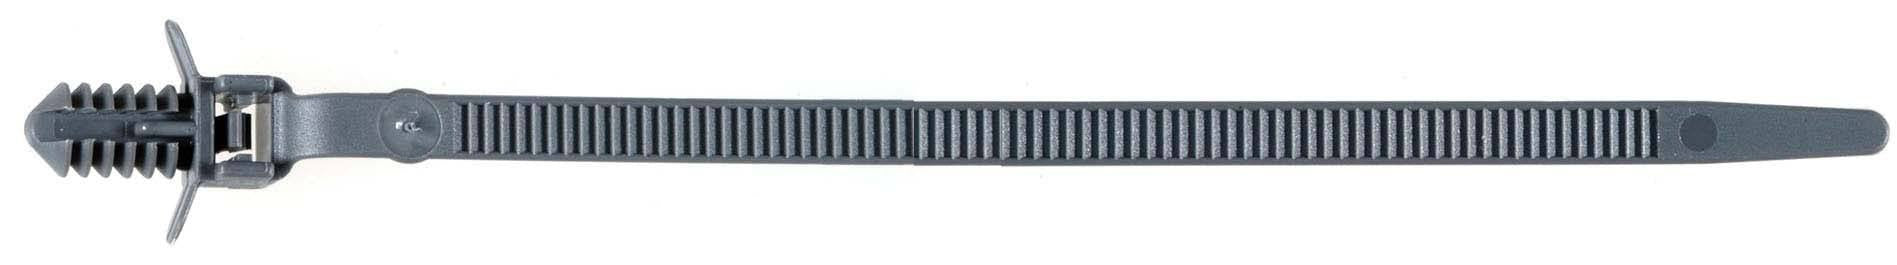 Auveco 21203 GM Cable Tie Gray Nylon 6 inches Fits 1/4 inch hole Qty 25 